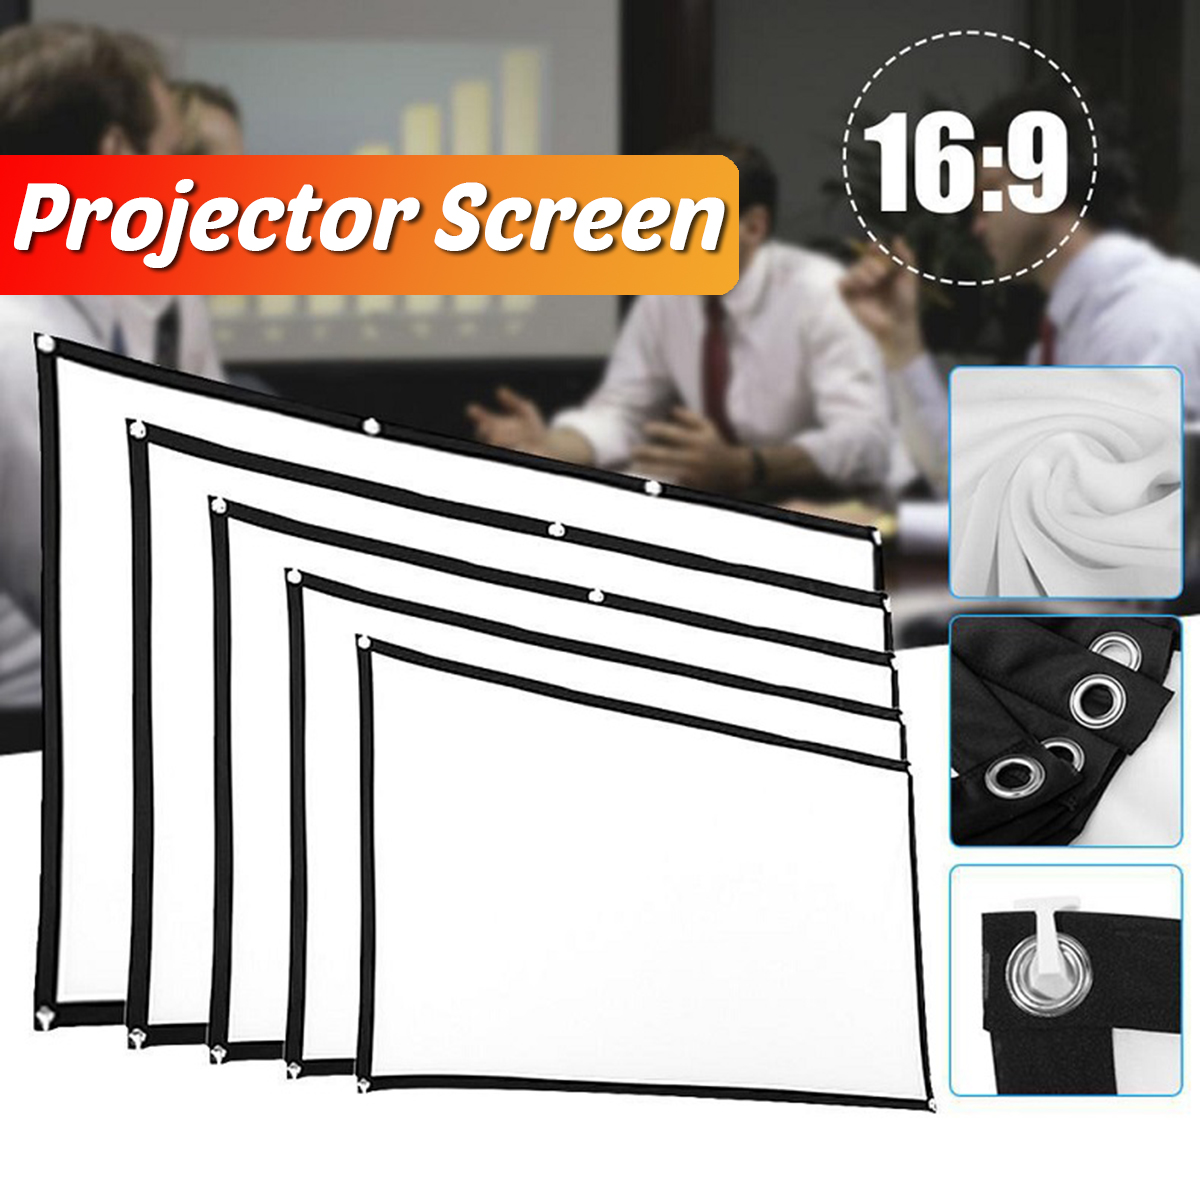 60100120150-inch-169-Foldable-Portable-Projector-Screen-Cloth-Meeting-Presentation-Home-Theater-Proj-1701954-1